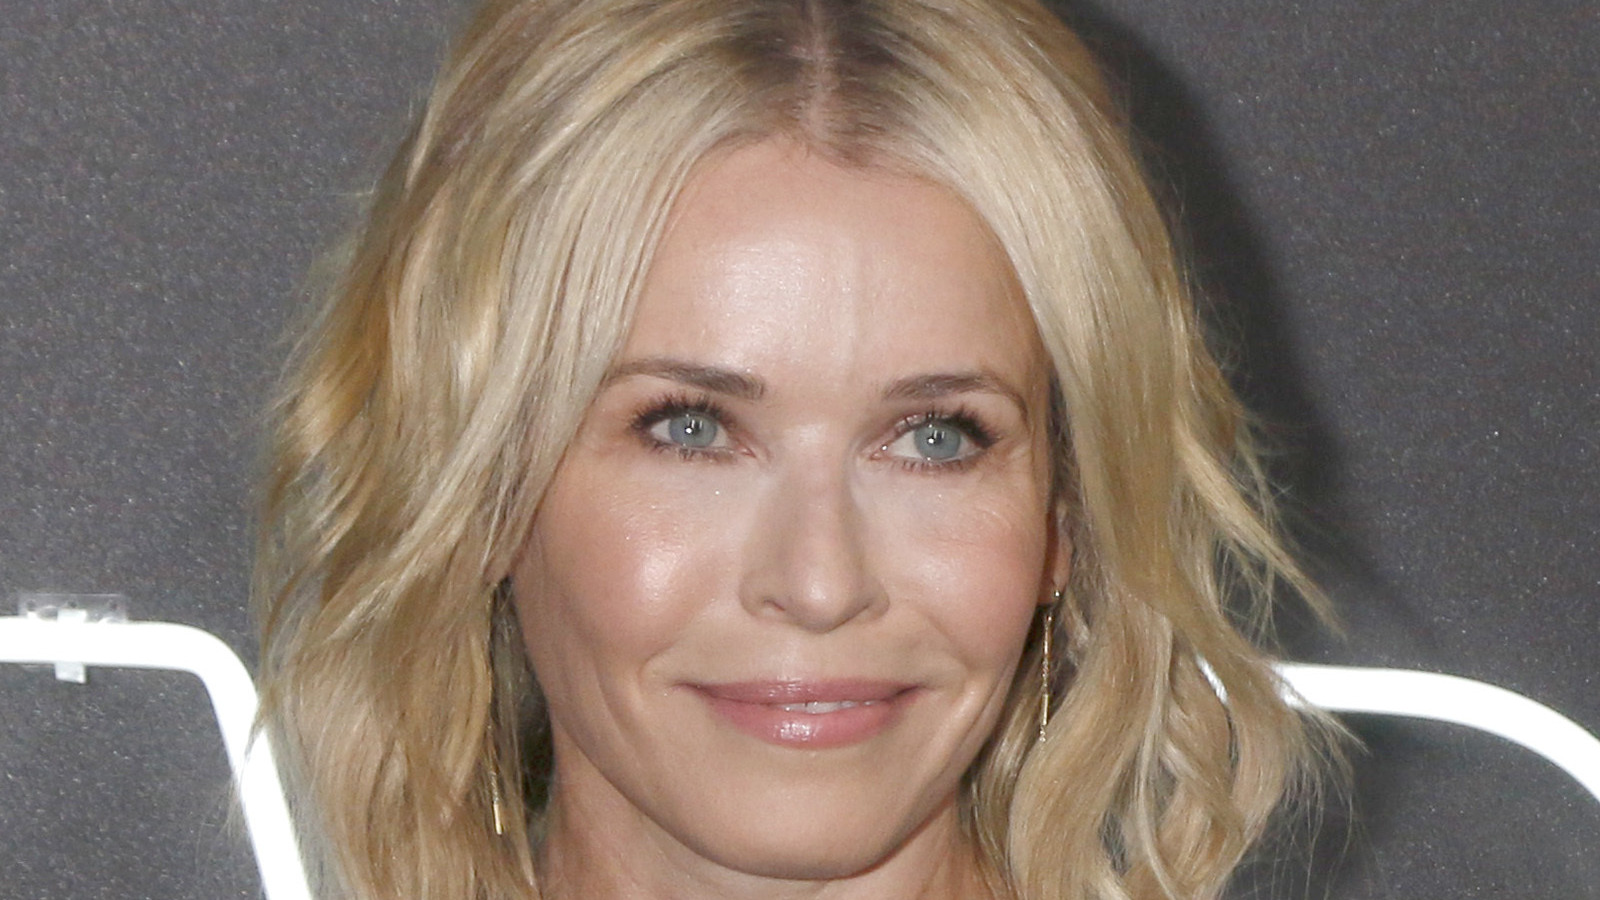 Chelsea handler dating cent and 50 A Complete